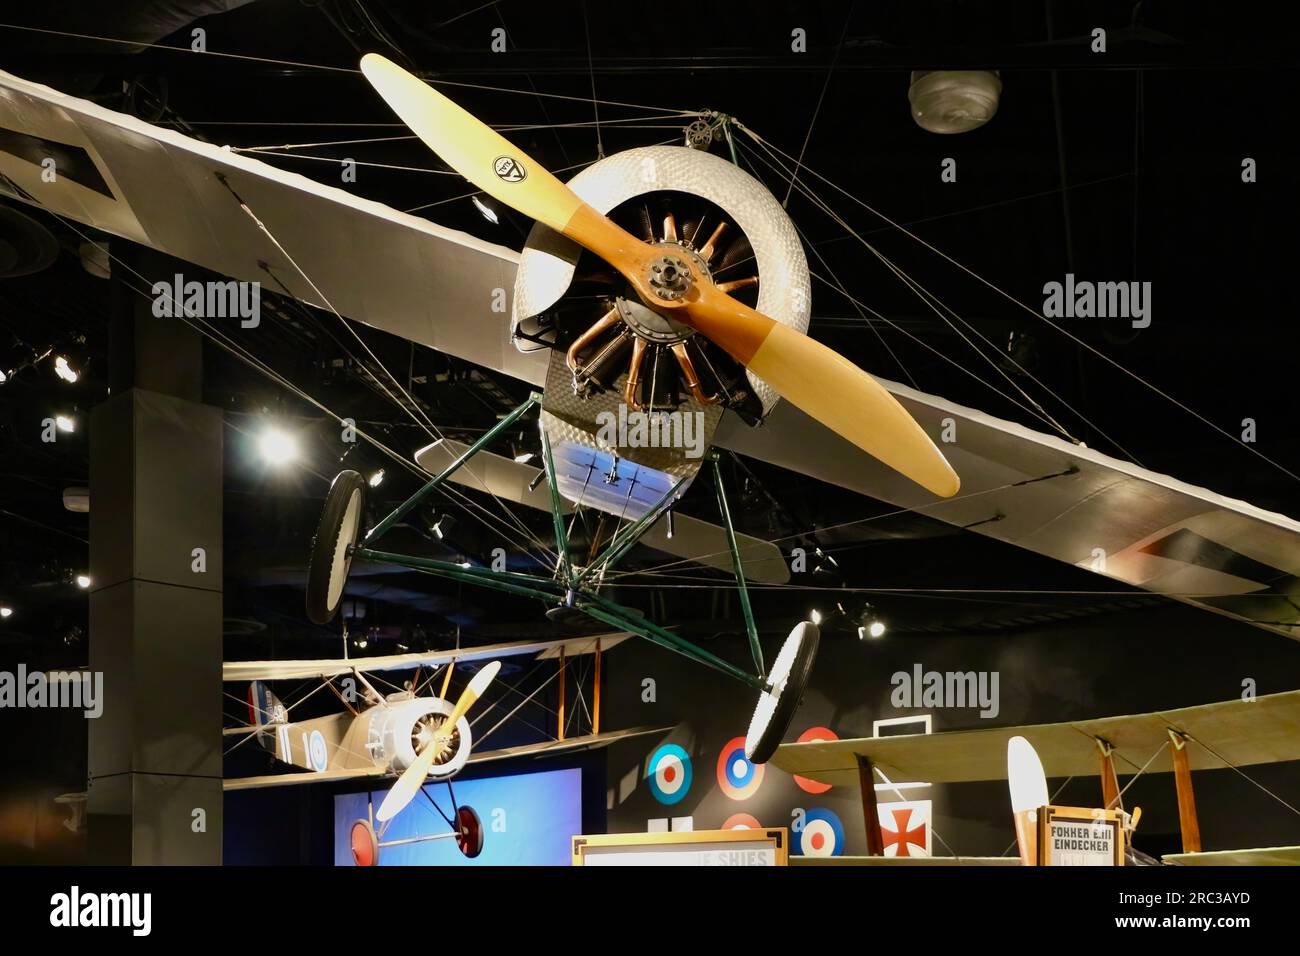 Fokker E.III Eindecker Reproduction German WW1 fighter plane on display at The Museum of Flight Seattle Washington State USA Stock Photo